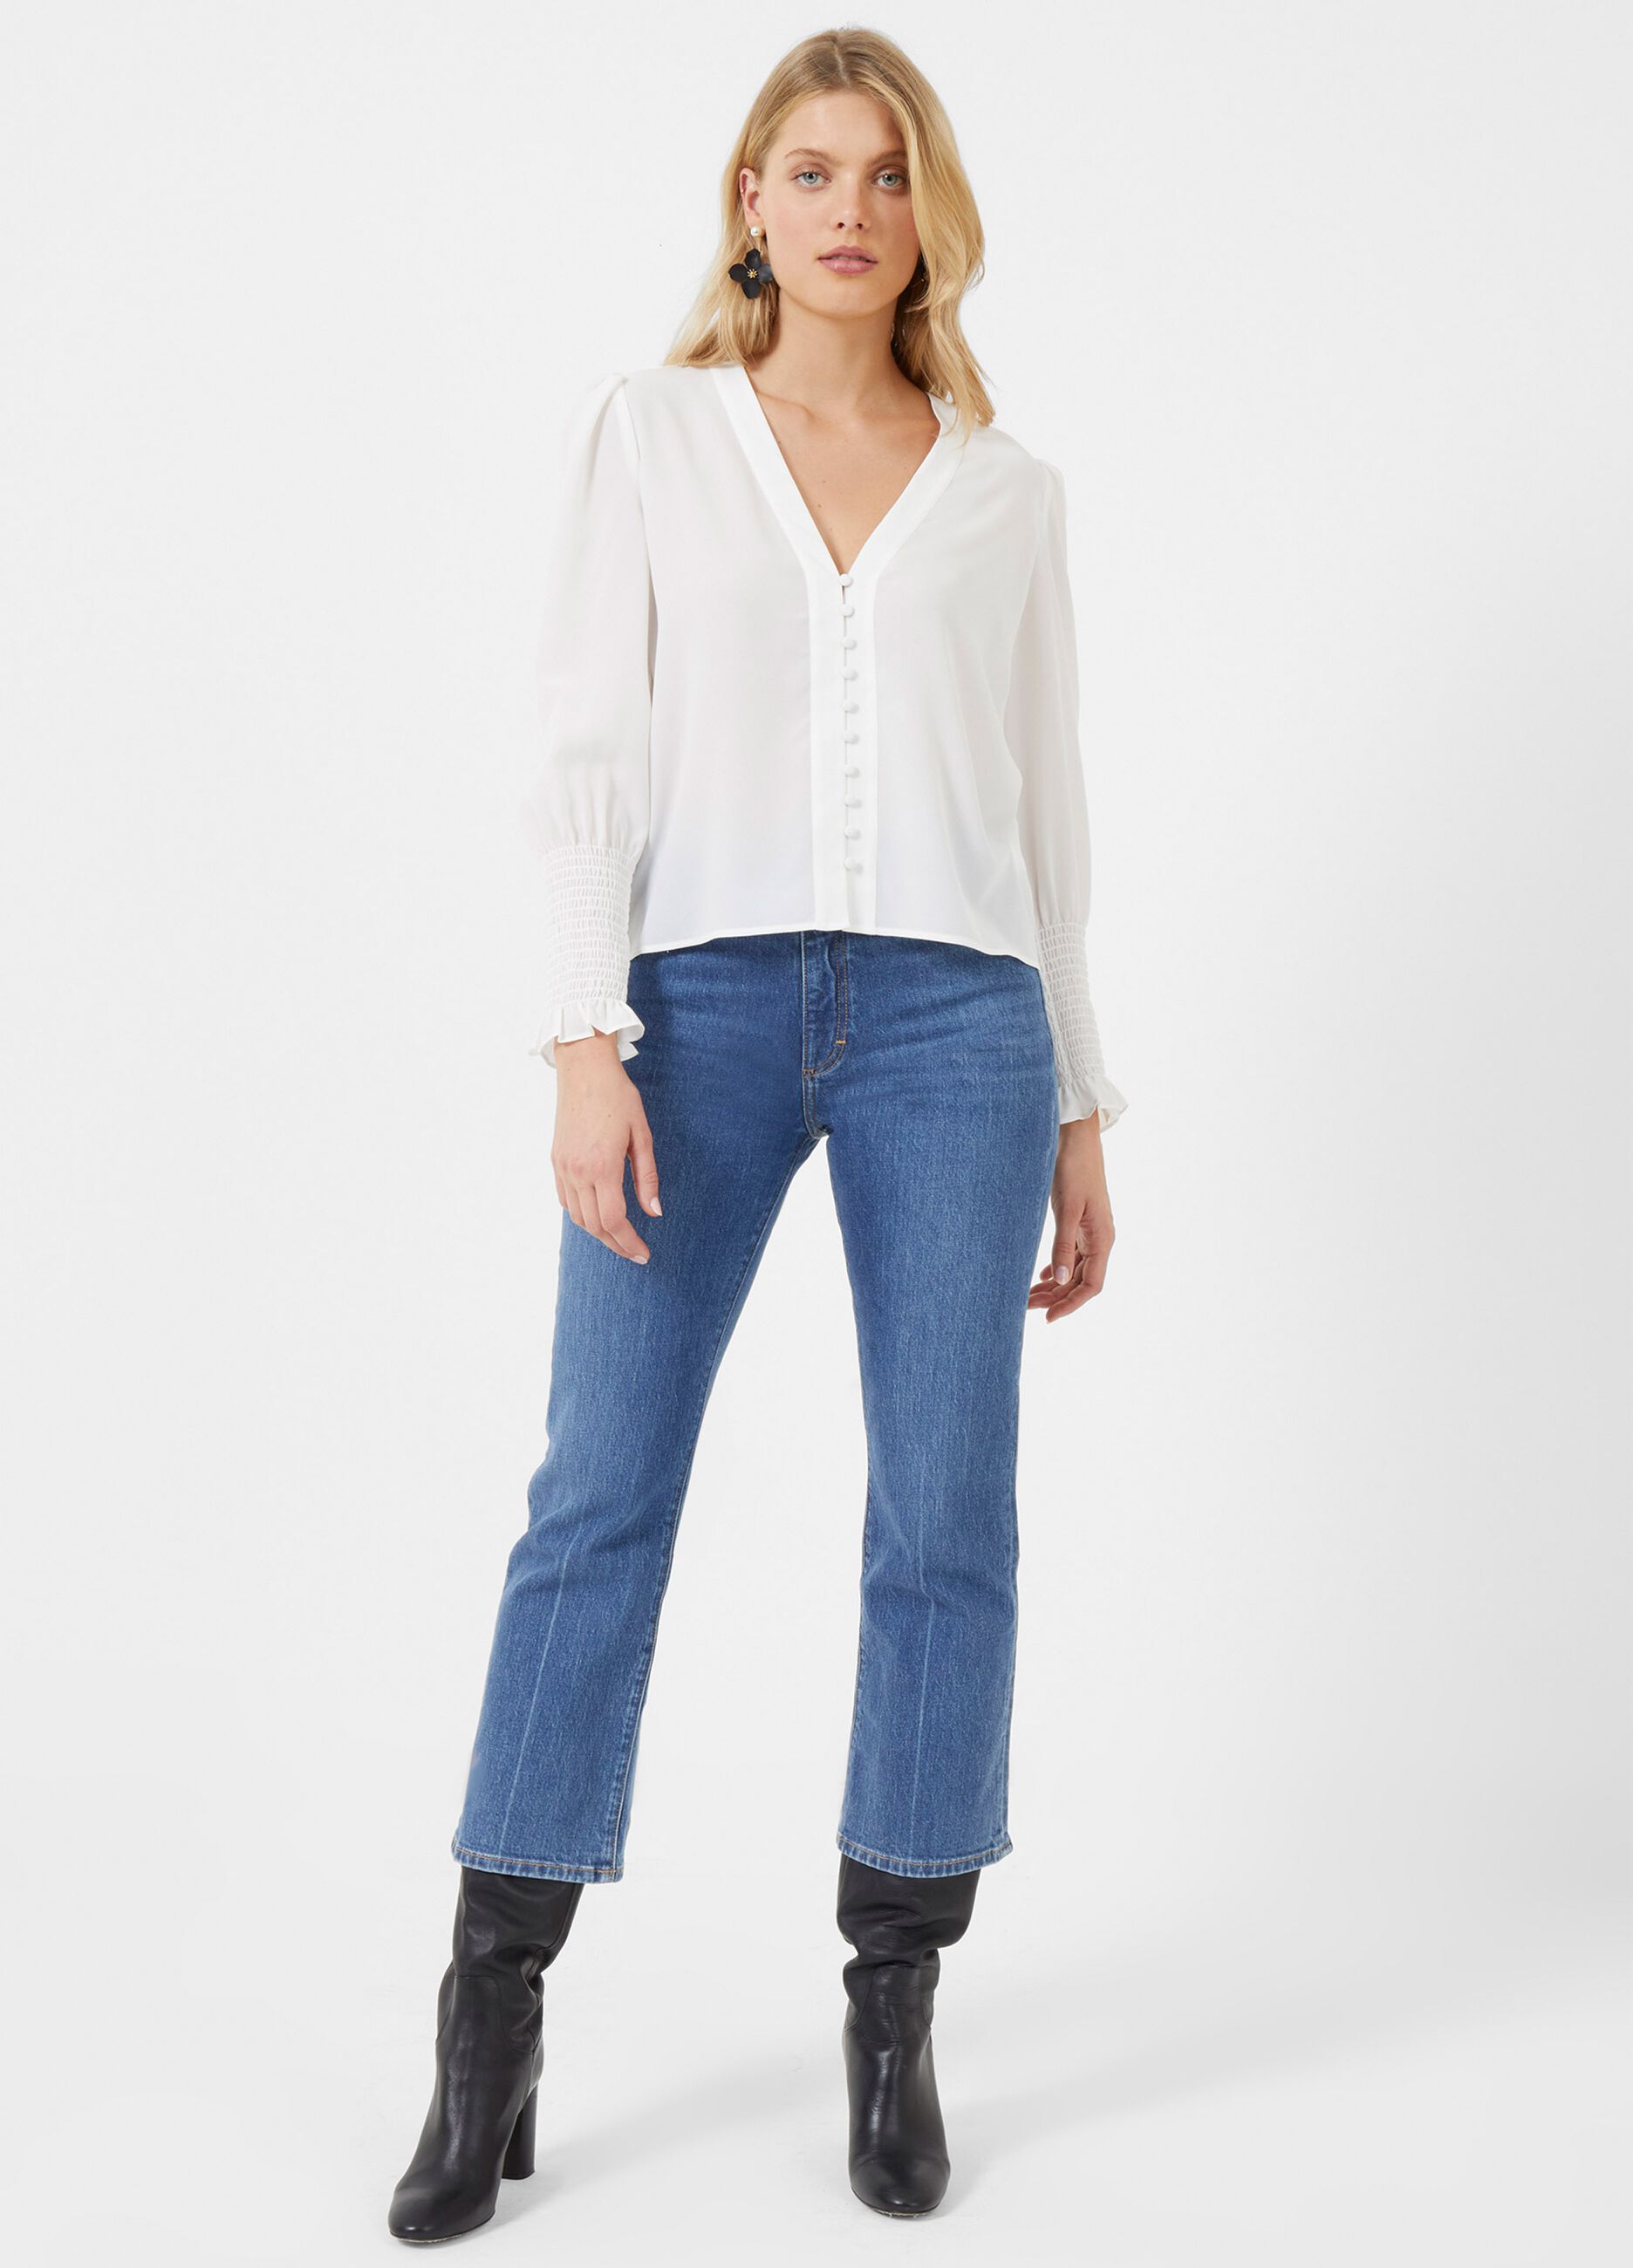 French Connection blouse with puffed sleeves